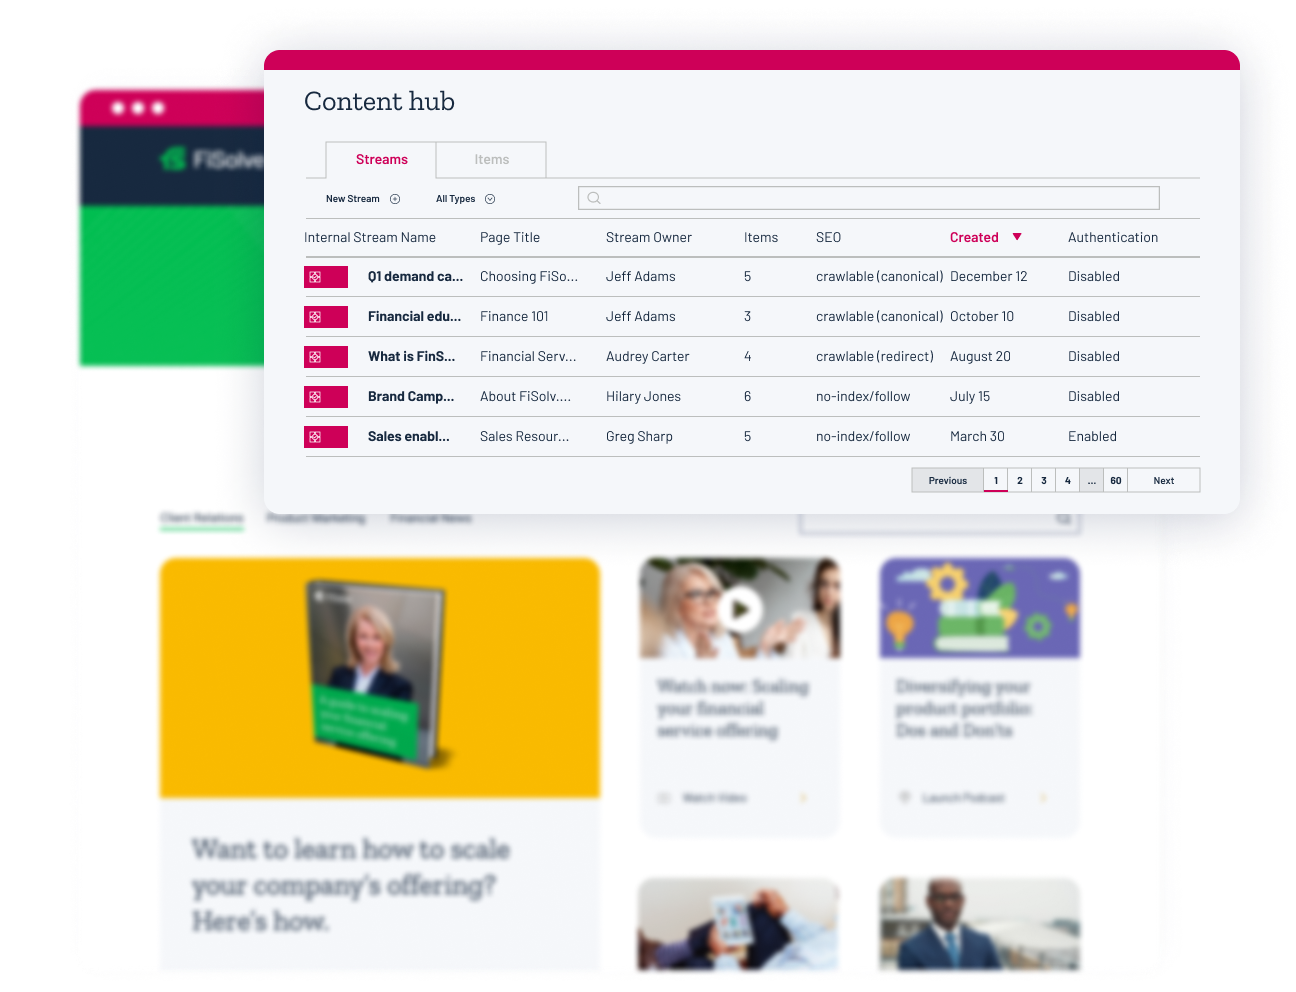 Screenshot of content hub being used for content management